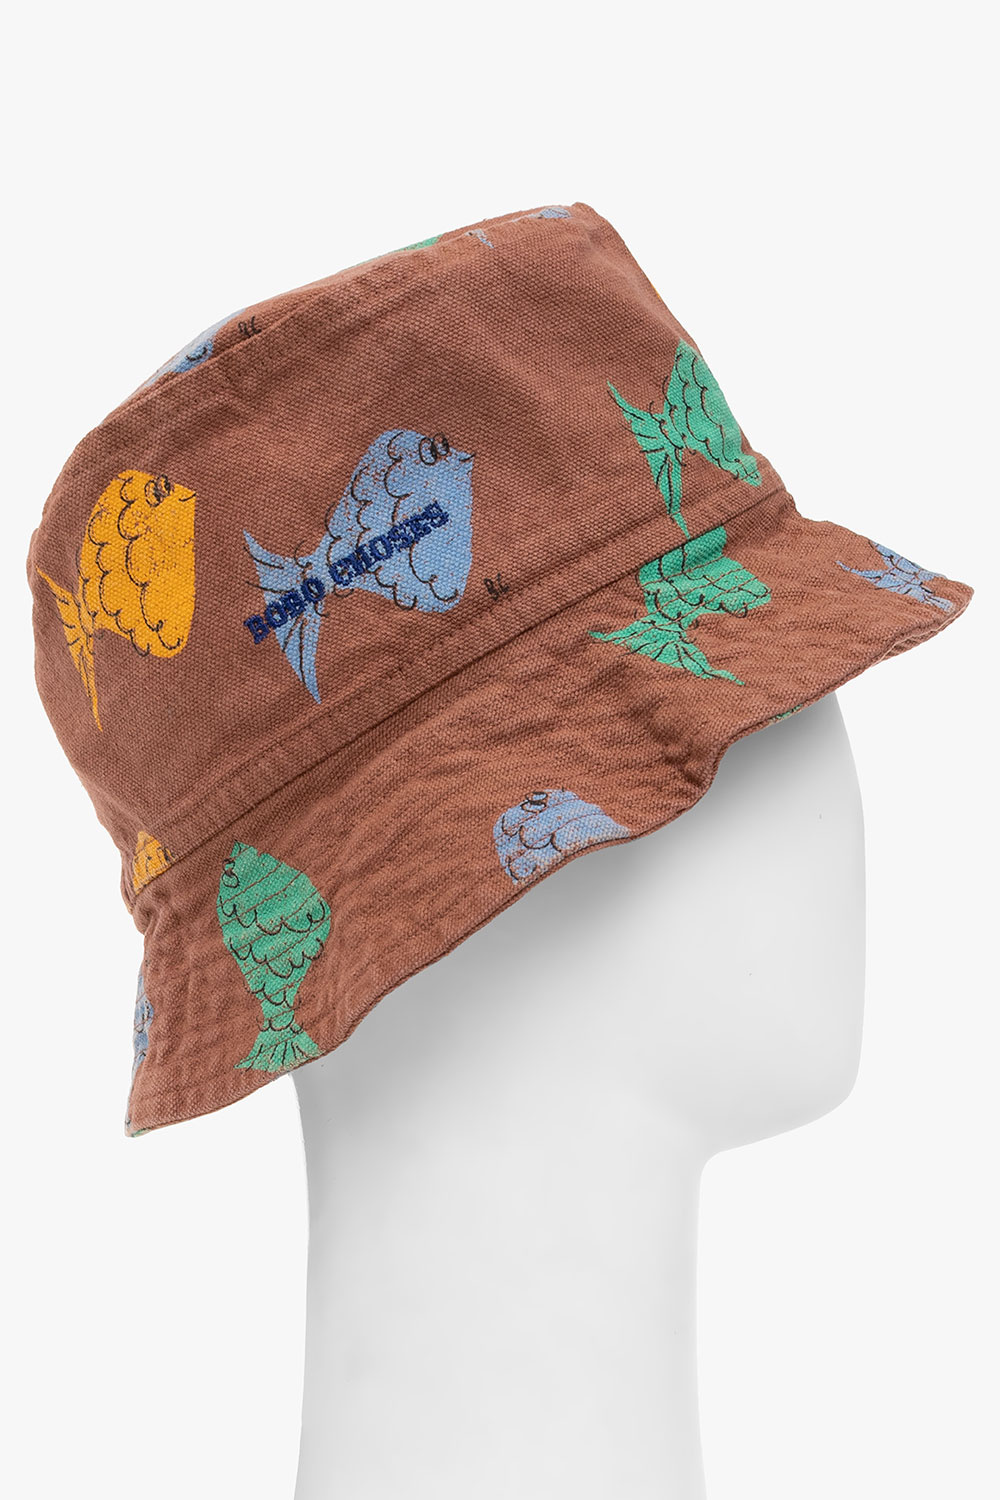 Bobo Choses Bucket hat summer with fish pattern